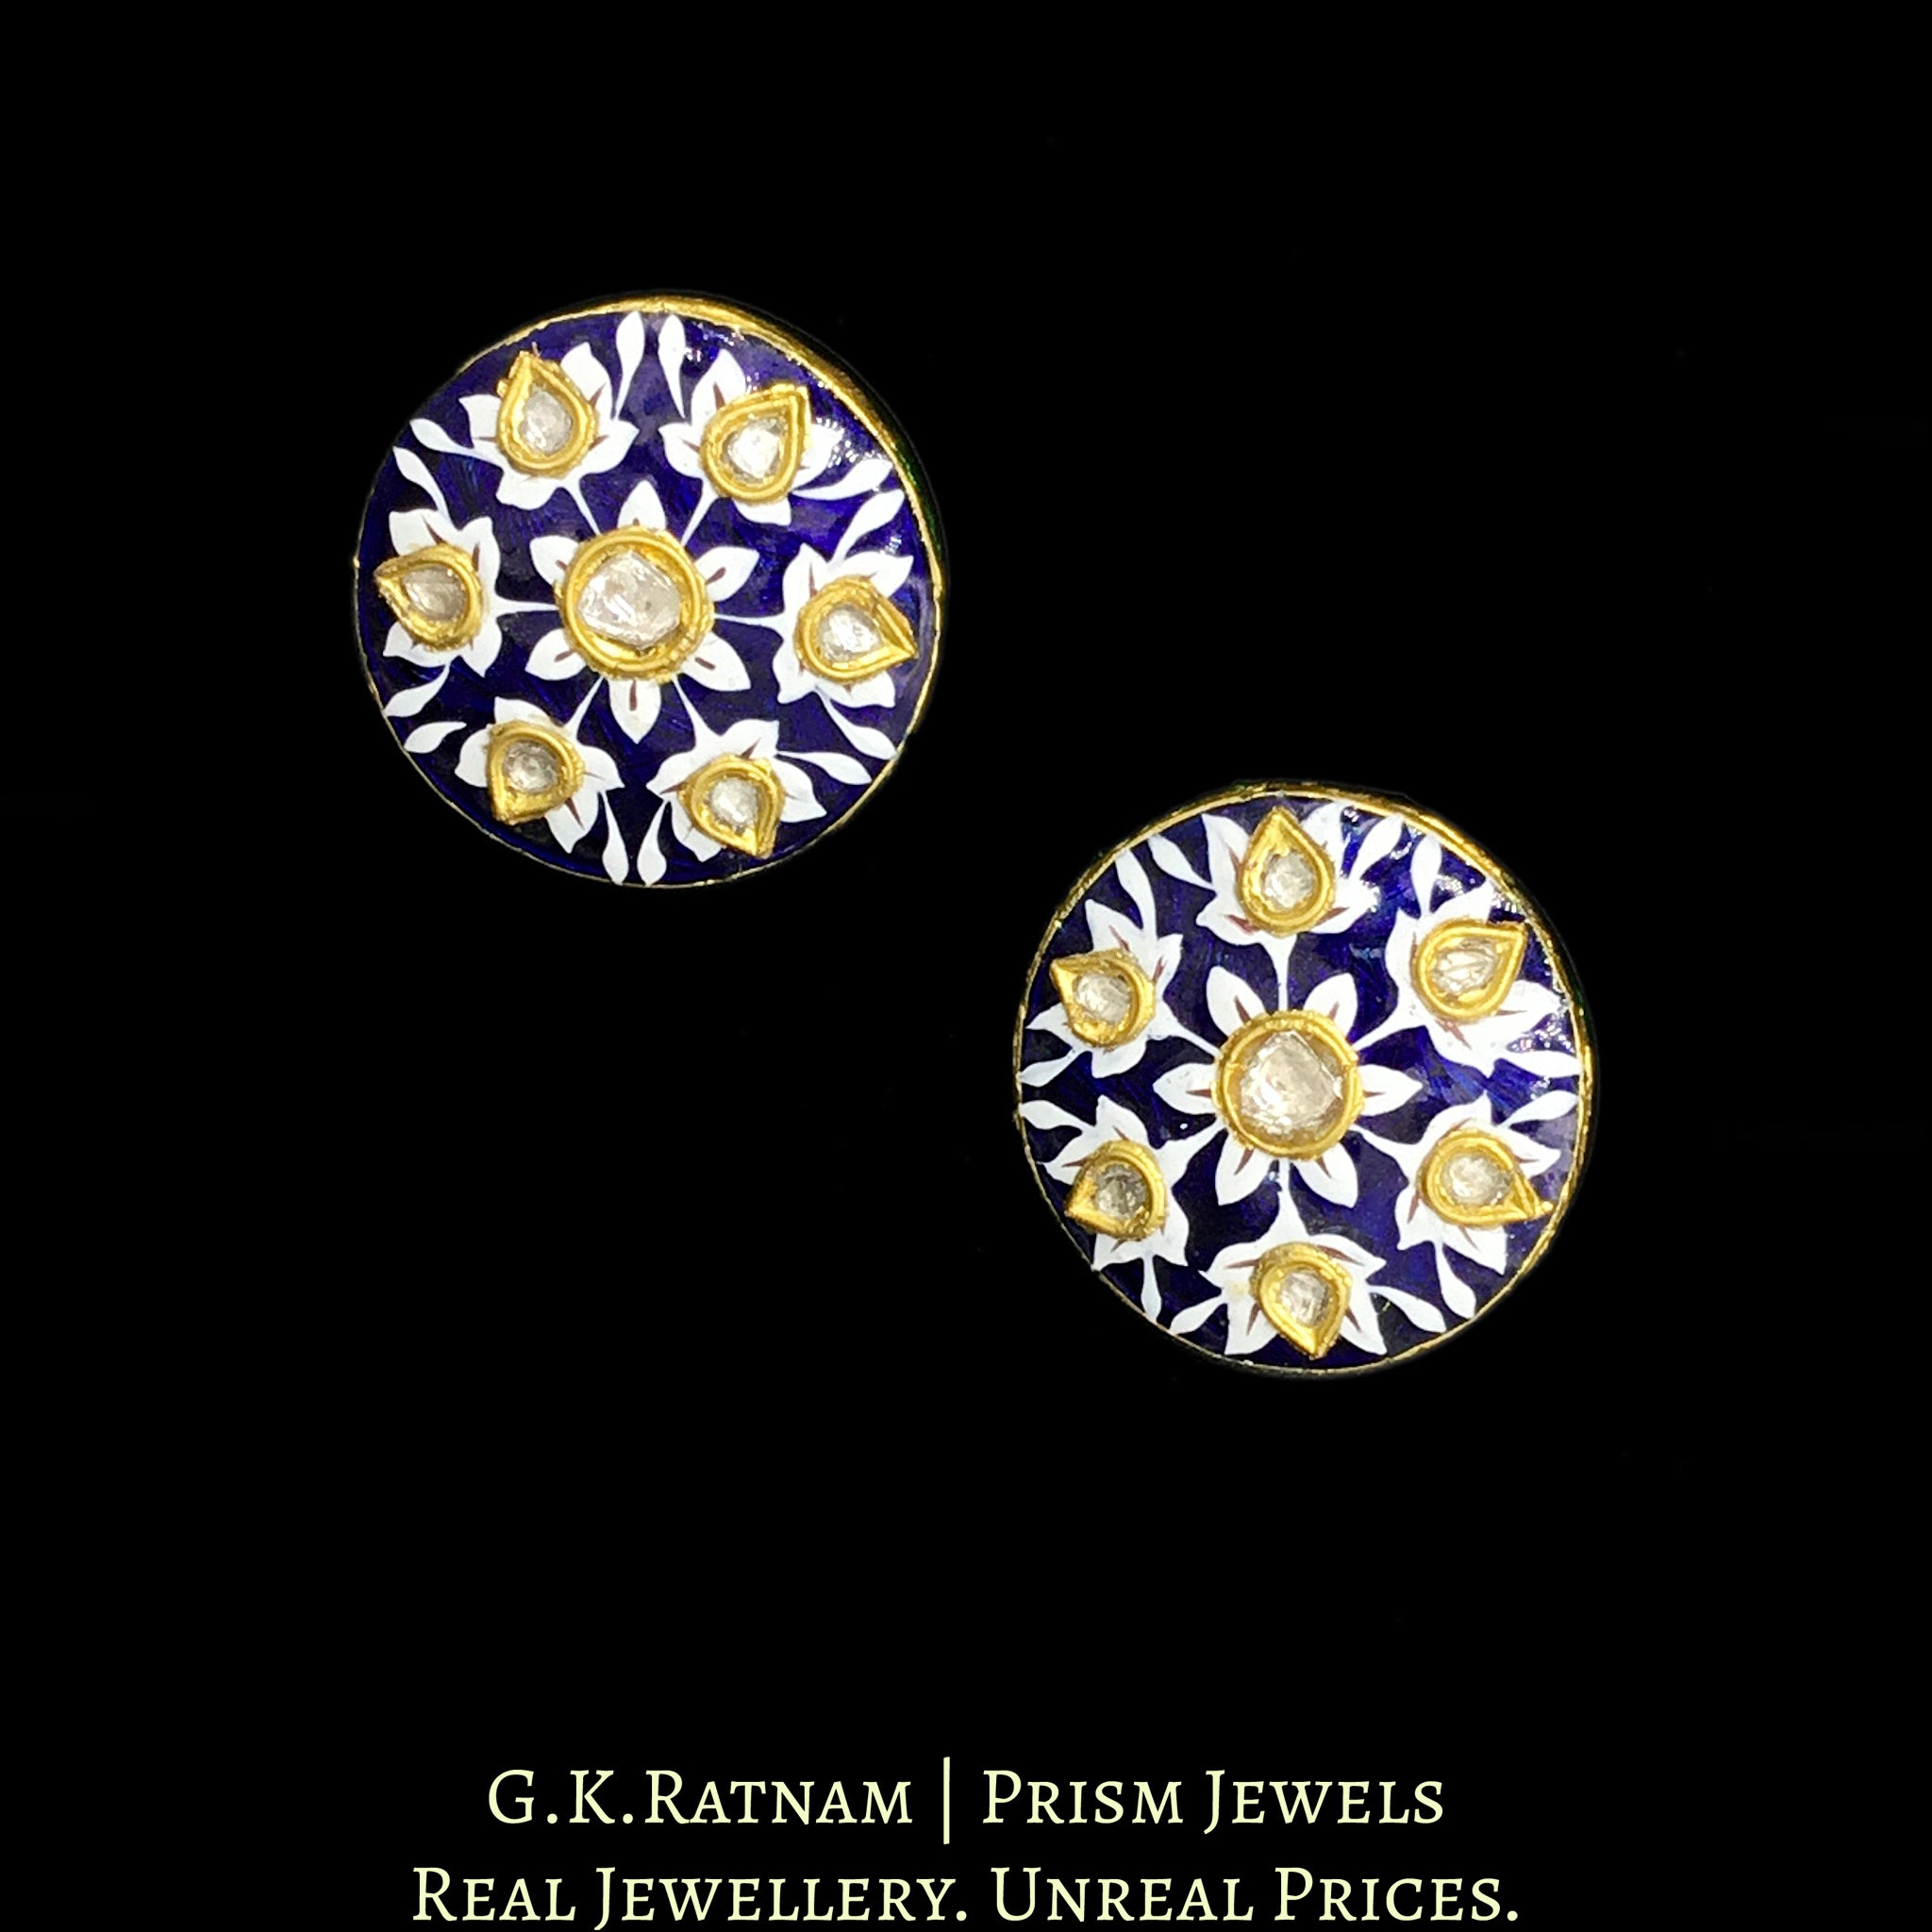 23k Gold and Diamond Polki Tops / Studs Earring Pair with exquisite blue and white enamelling